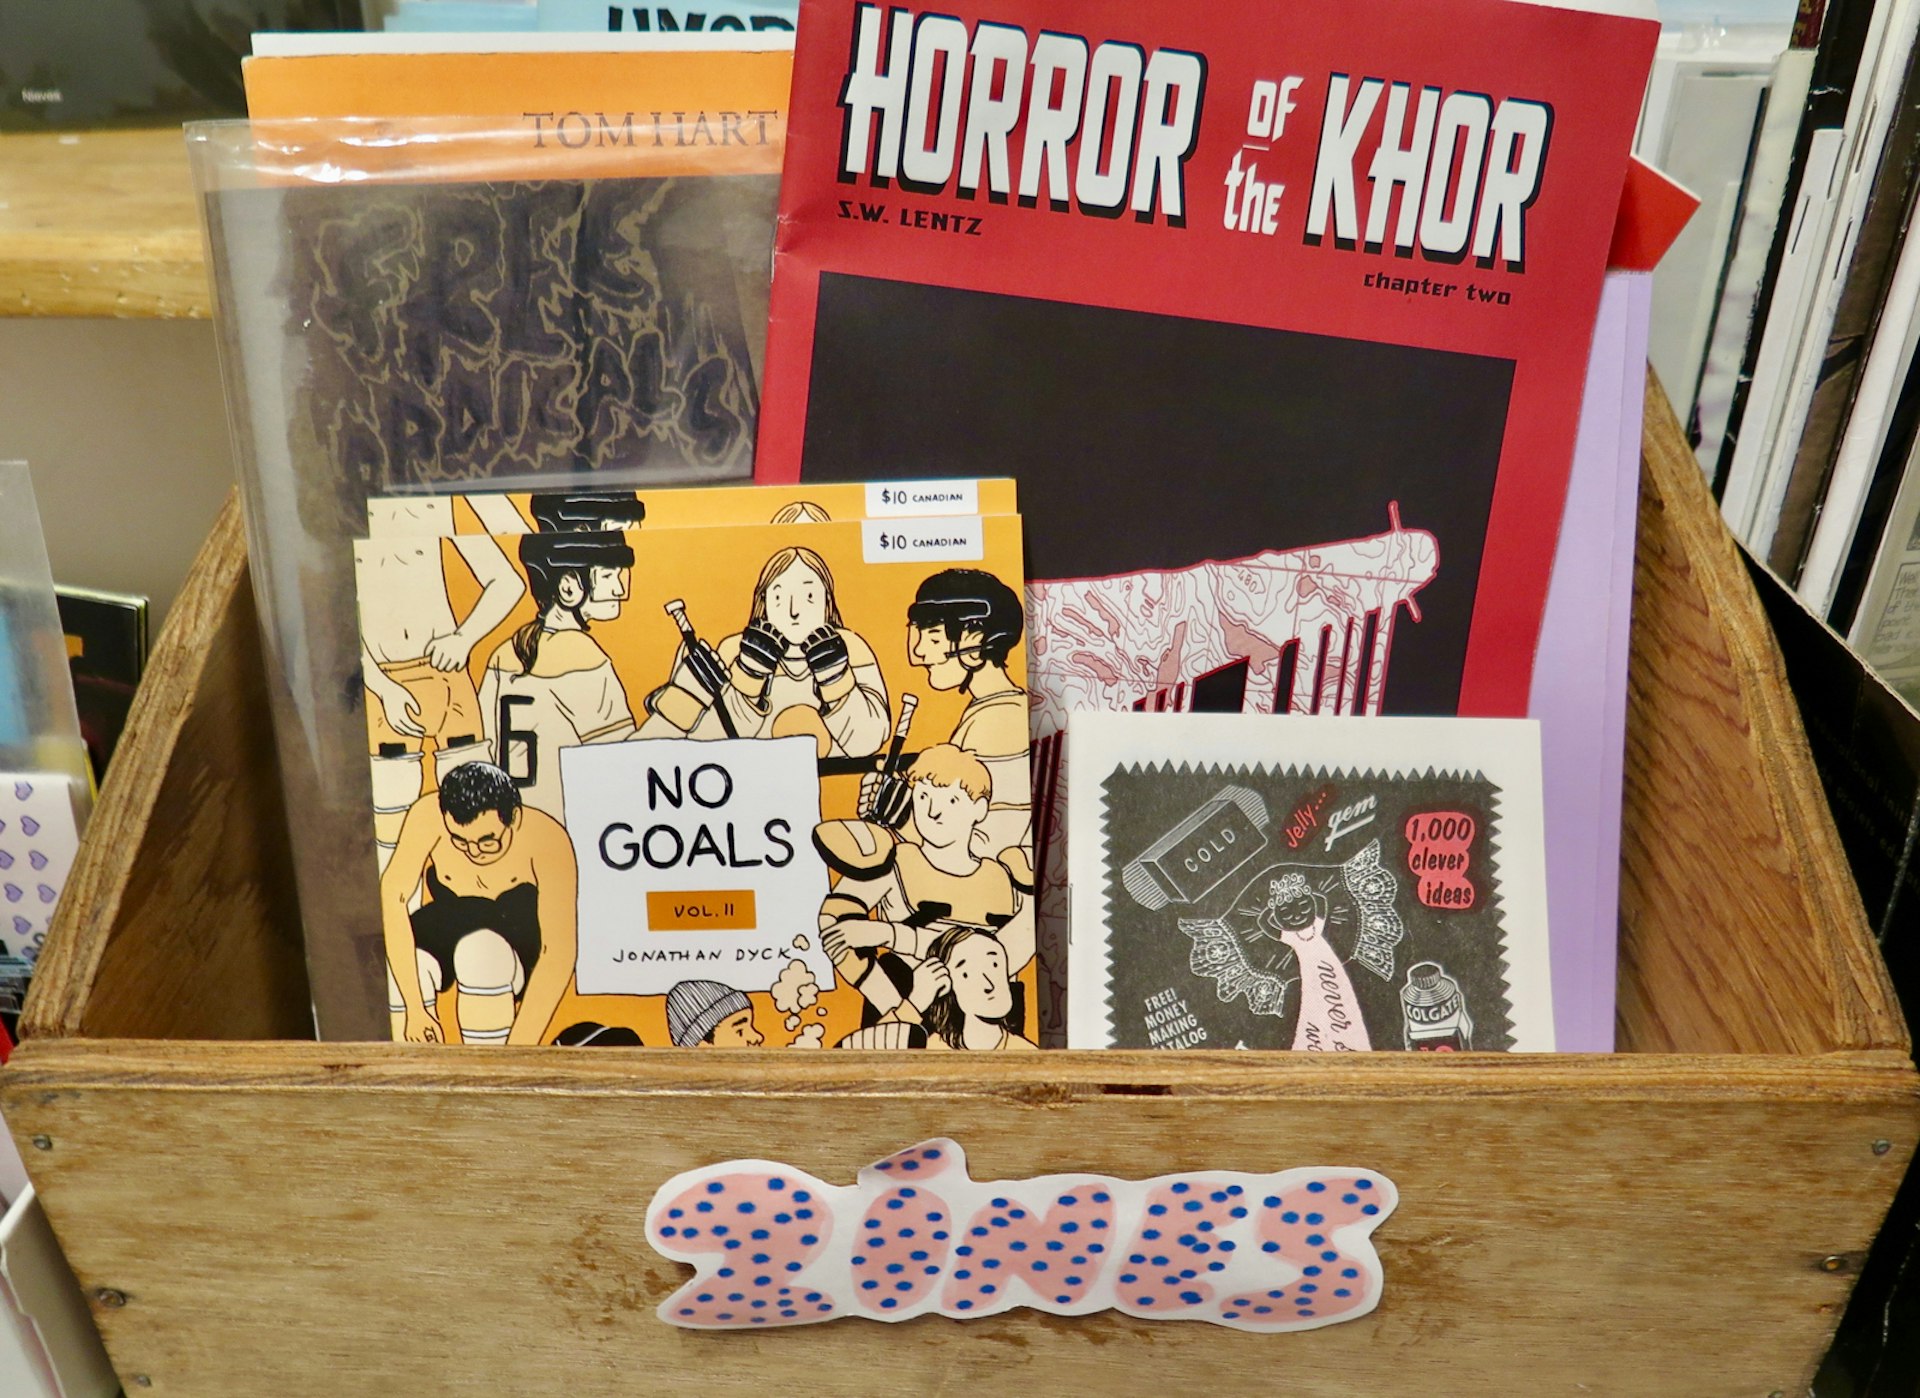 A box of zines at Lucky's Books & Comics in Vancouver. Titles include No Goals Vol II, Horror of the Khor and 1000 clever ideas; Vancouver's best bookstores.